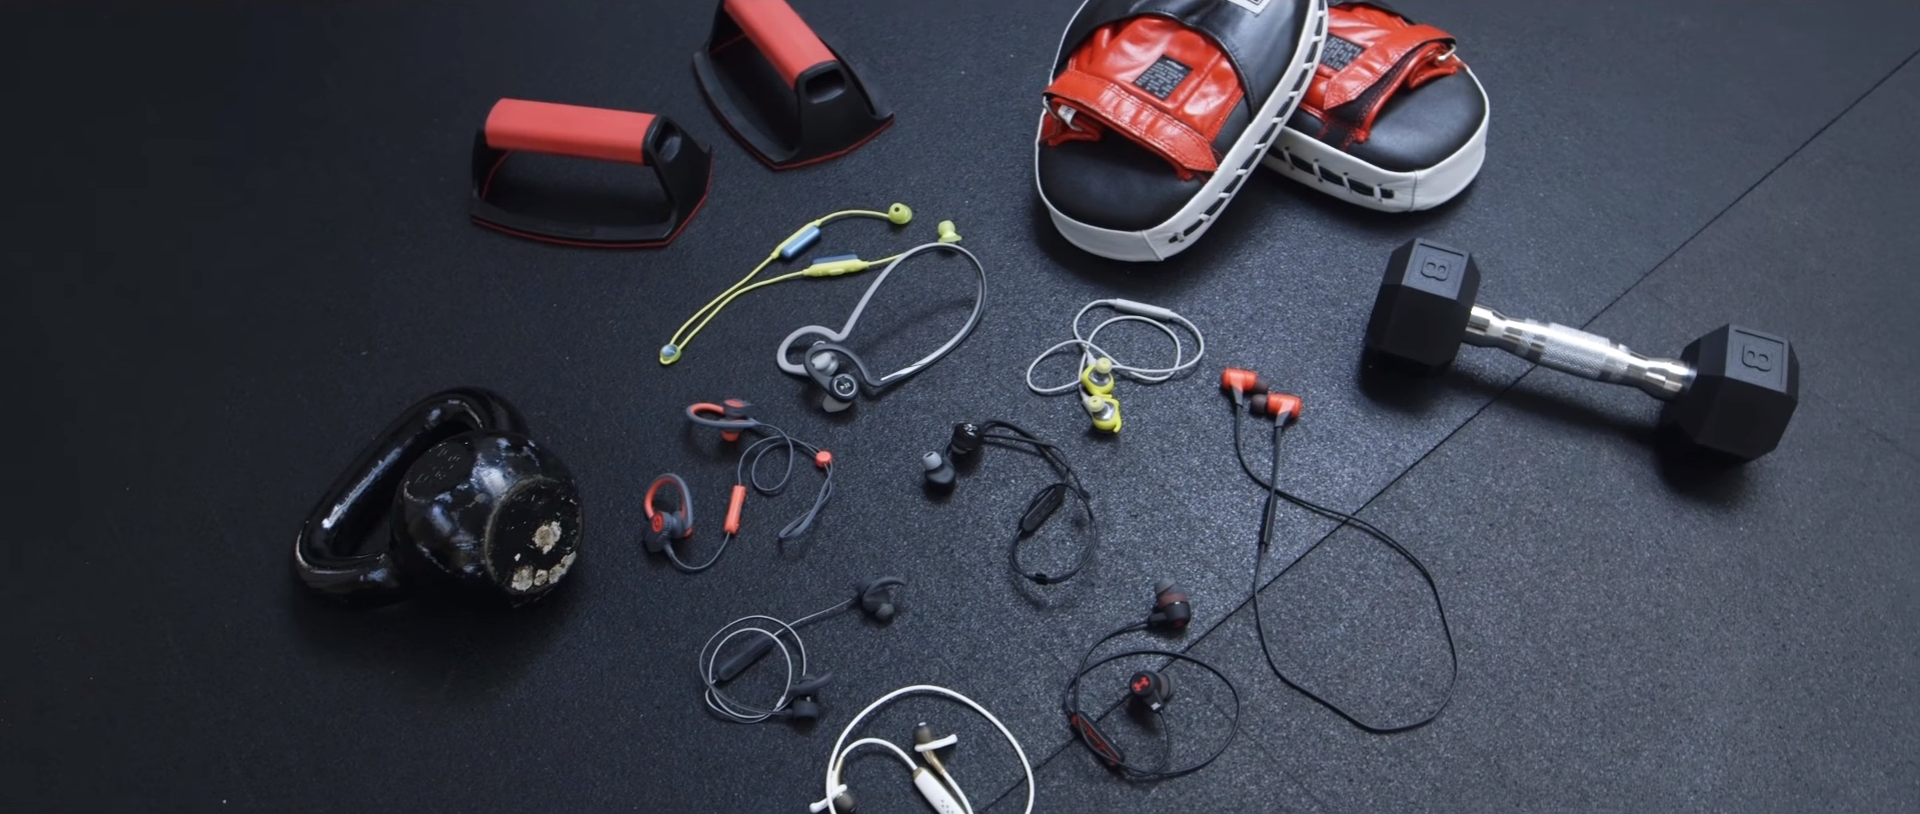 What are the best headphones for running? – Answered